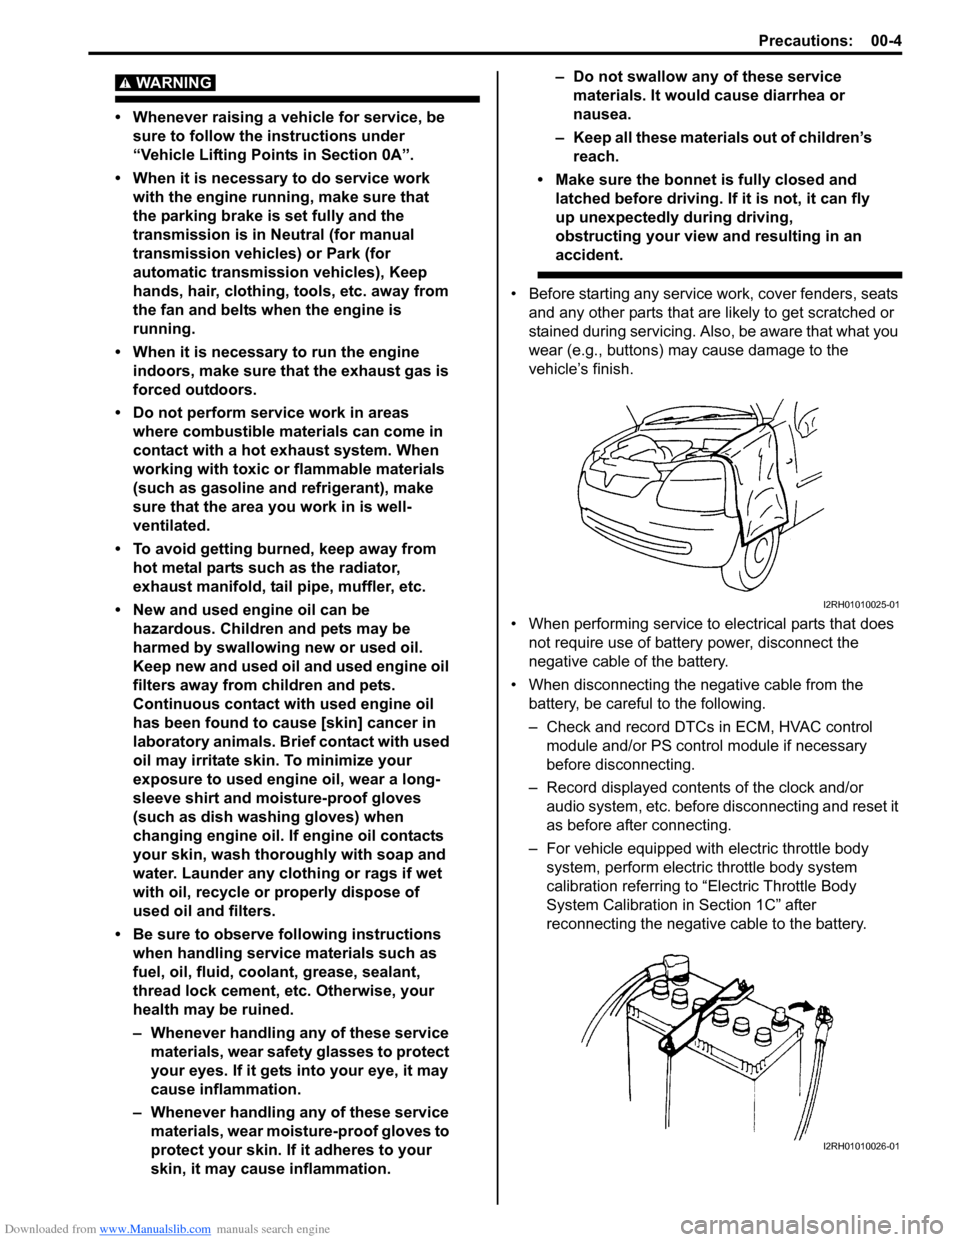 SUZUKI SX4 2006 1.G Service Workshop Manual Downloaded from www.Manualslib.com manuals search engine Precautions: 00-4
WARNING! 
• Whenever raising a vehicle for service, be 
sure to follow the instructions under 
“Vehicle Lifting Points in